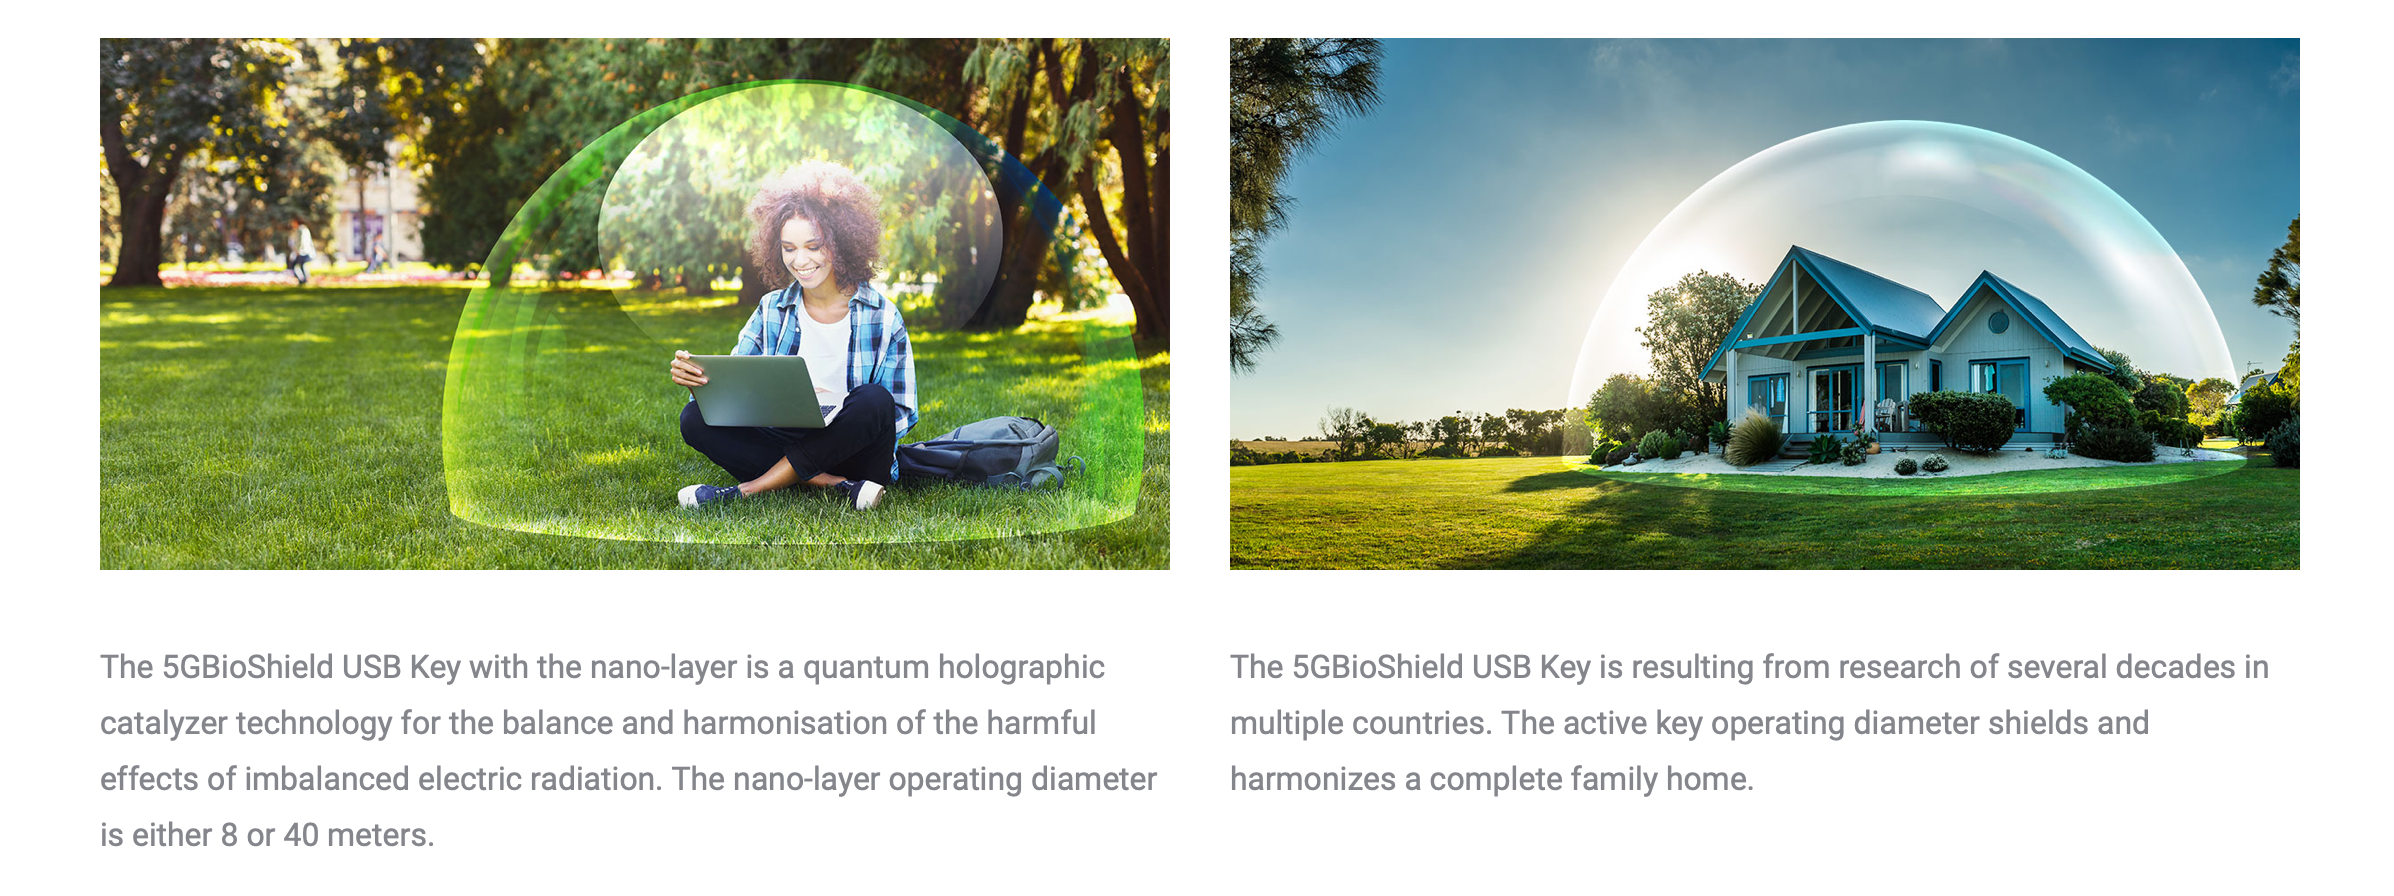 Screnshot of two images with a little description about 5GBioShield USB key 